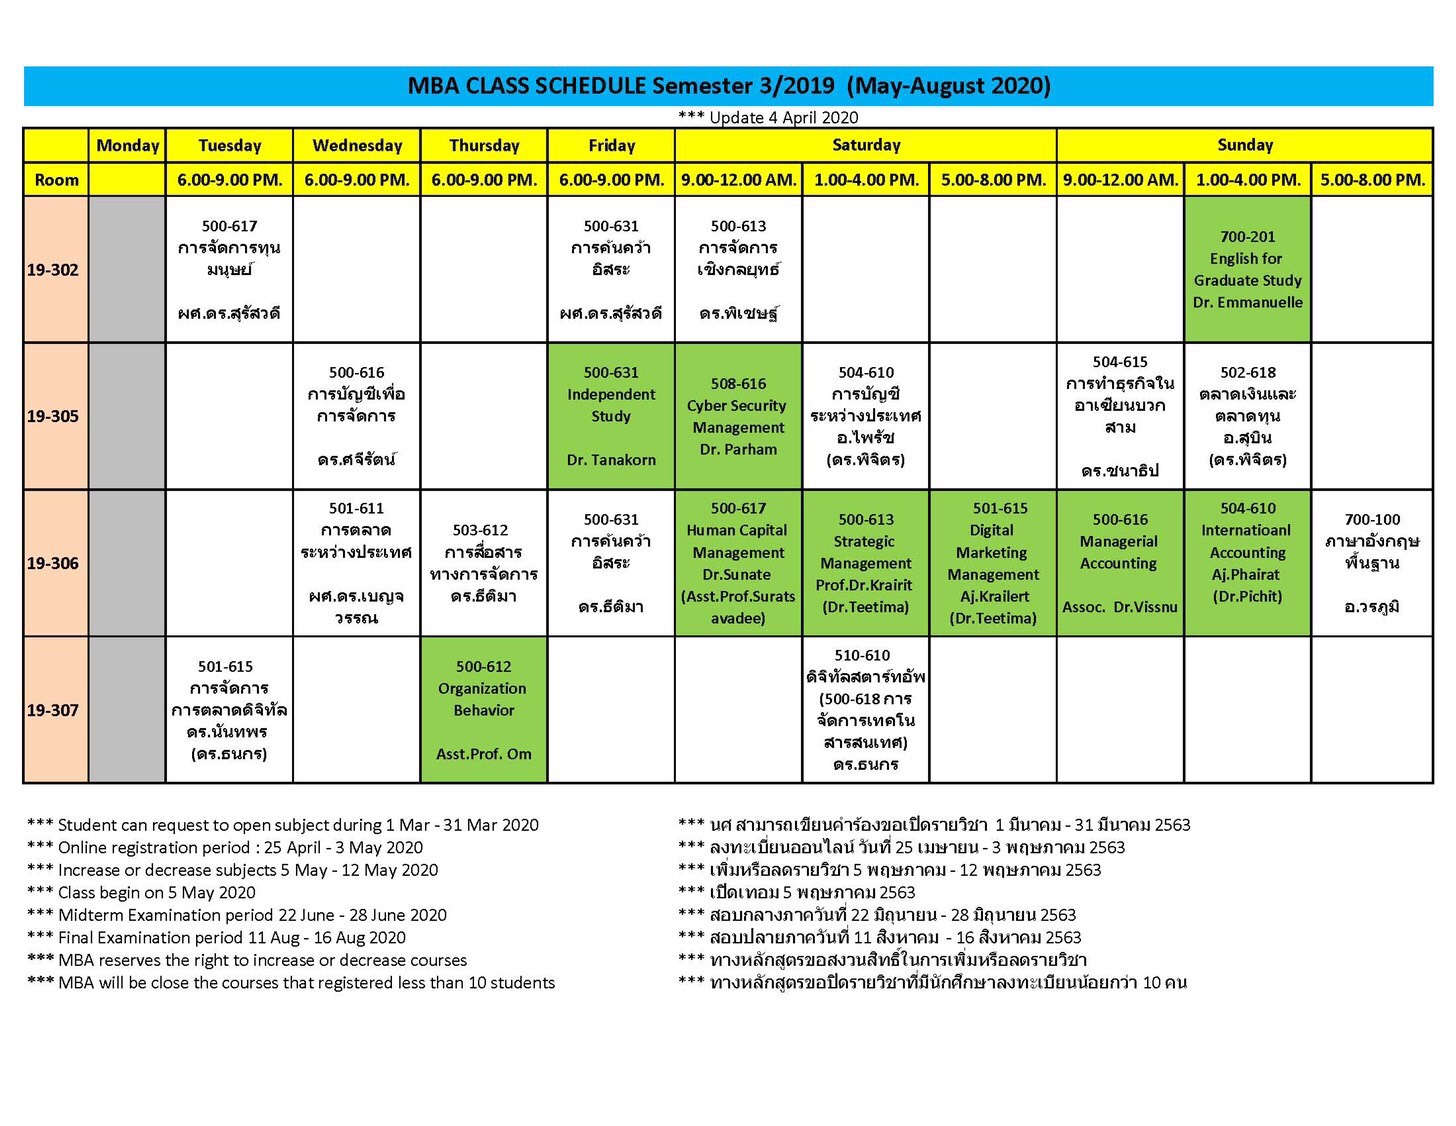 MBA CLASS SCHEDULE Semester 3/2019 (May-August 2020) - MBA Siam University